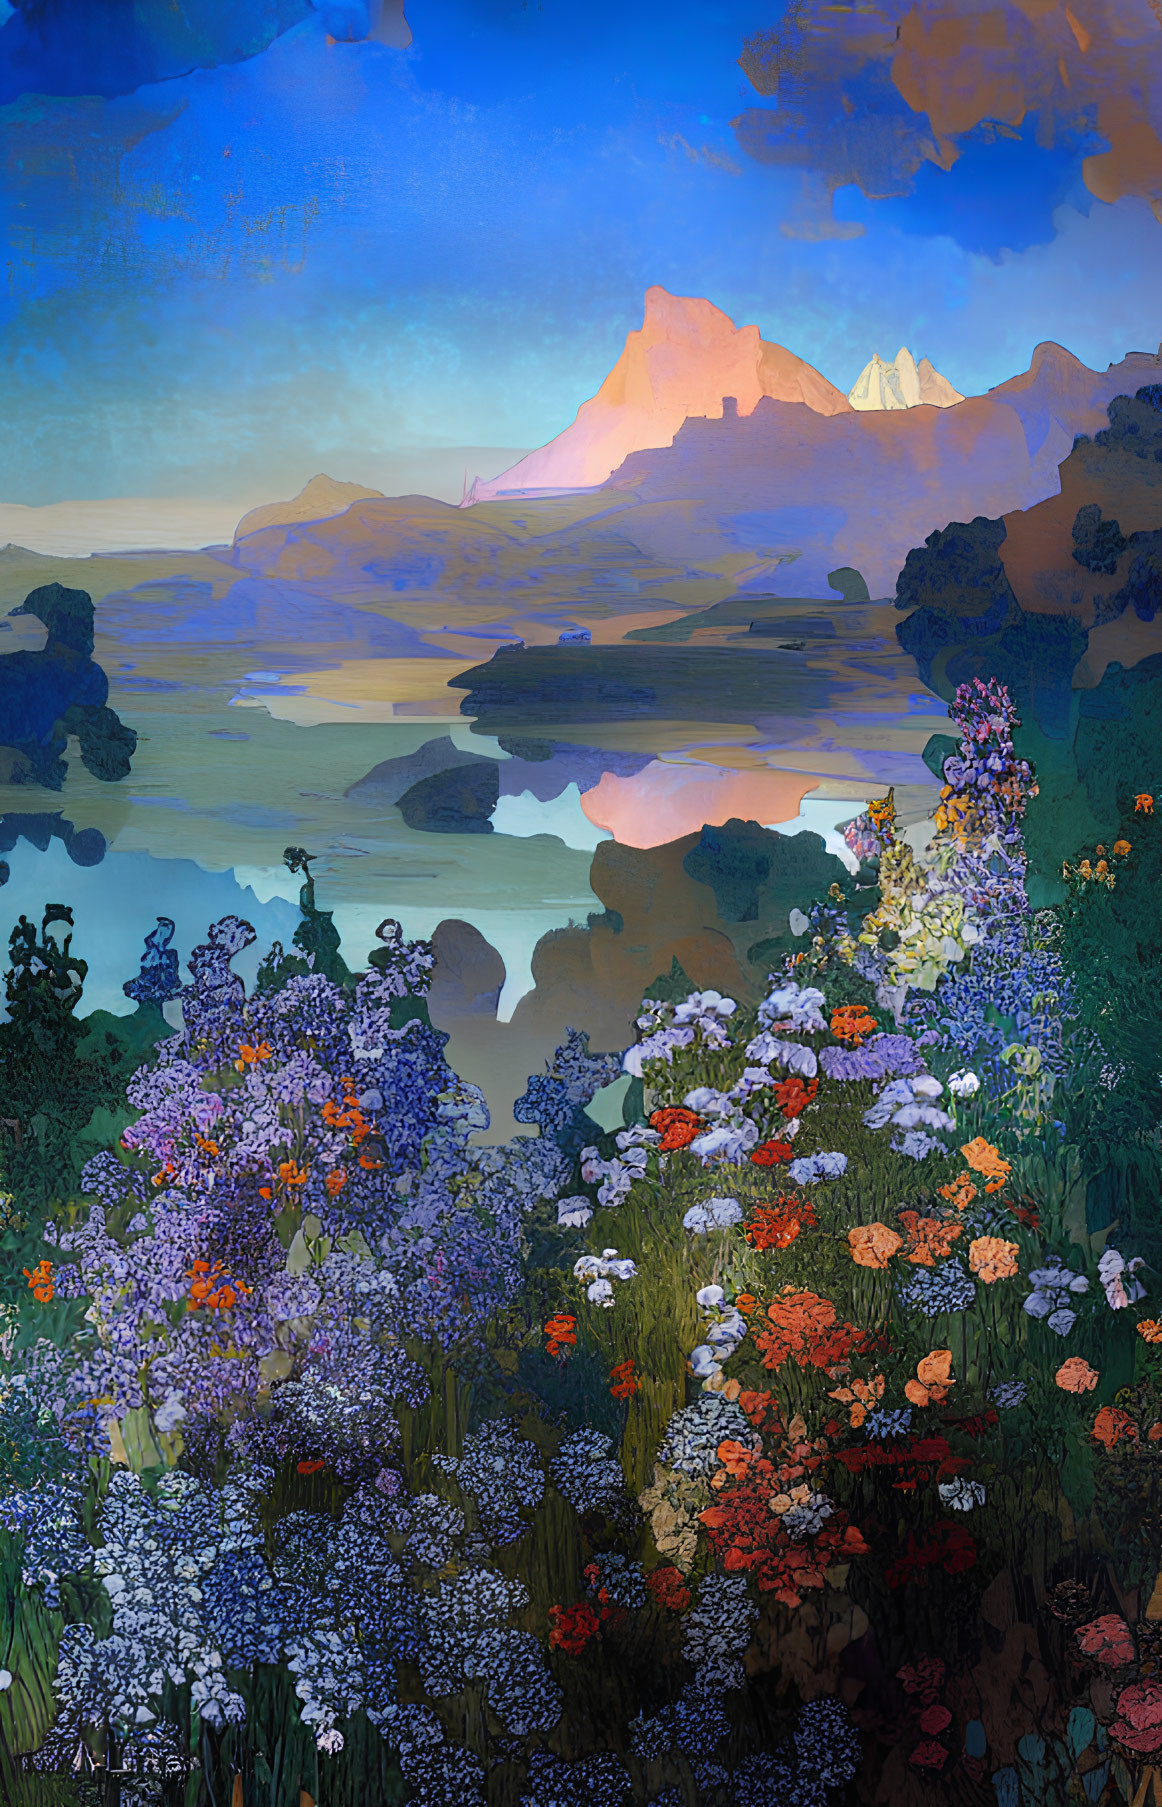 Colorful Flower Field, Lake, Snow-Capped Mountains in Twilight